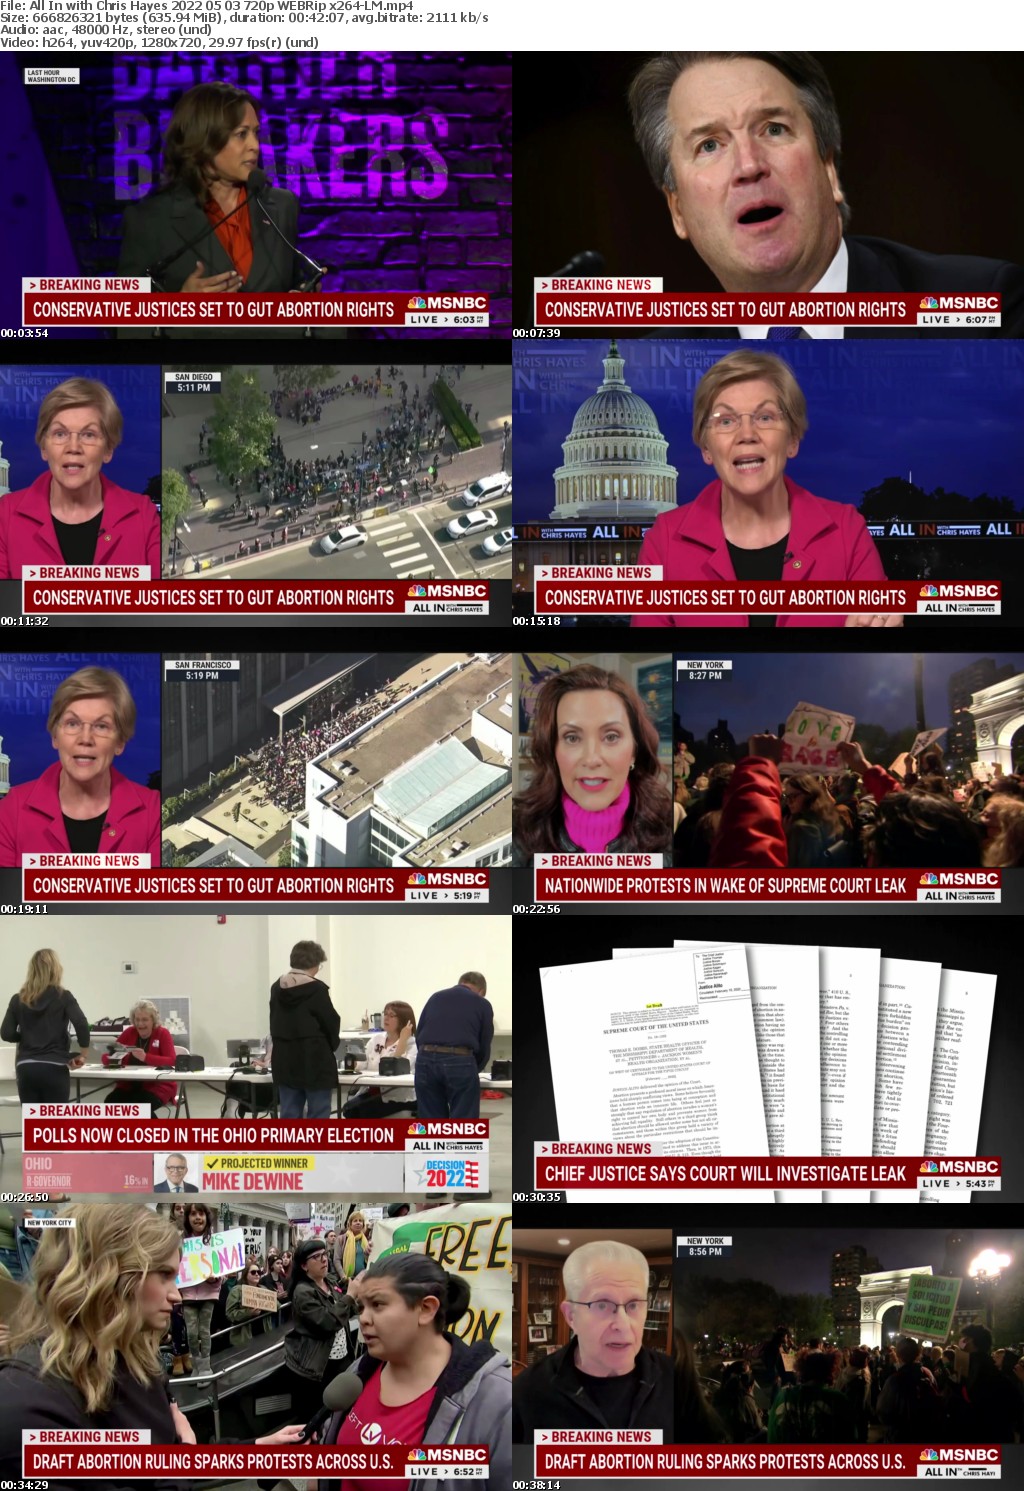 All In with Chris Hayes 2022 05 03 720p WEBRip x264-LM